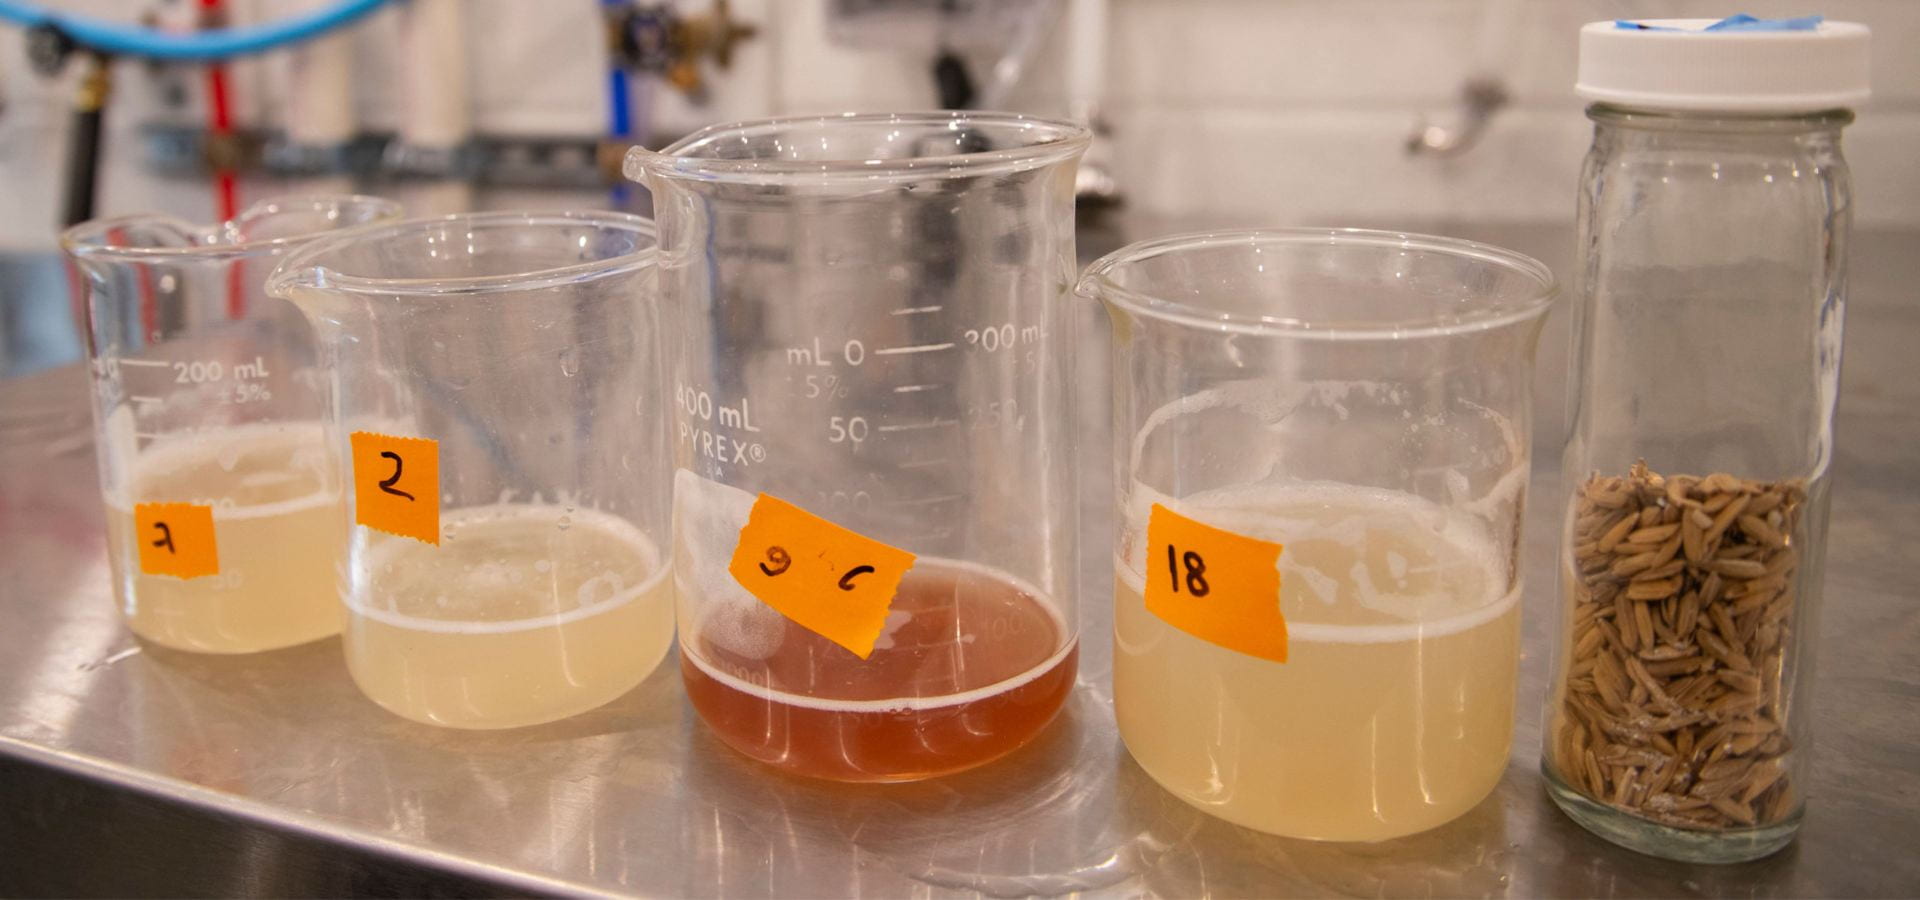 Four numbered laboratory beakers with varying amounts and colors of liquid ranging from pale yellow to amber on a metal surface, alongside a glass jar partially filled with grain kernels.